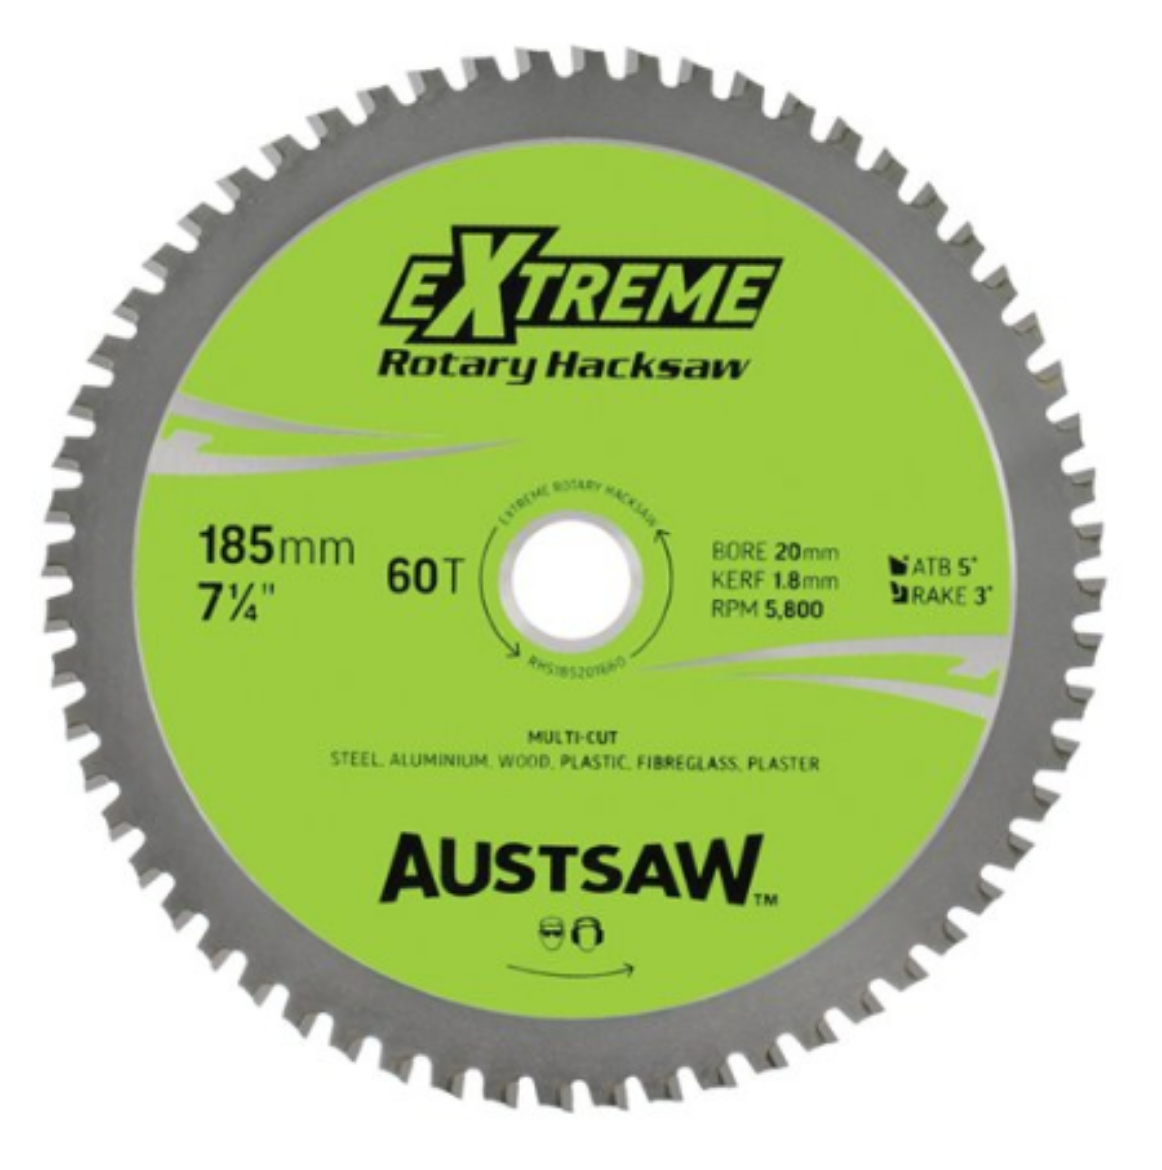 Picture of Austsaw Rotary Hacksaw Blade - Multi Purpose 7" 185 x 20/16 BORE x 60 Teeth